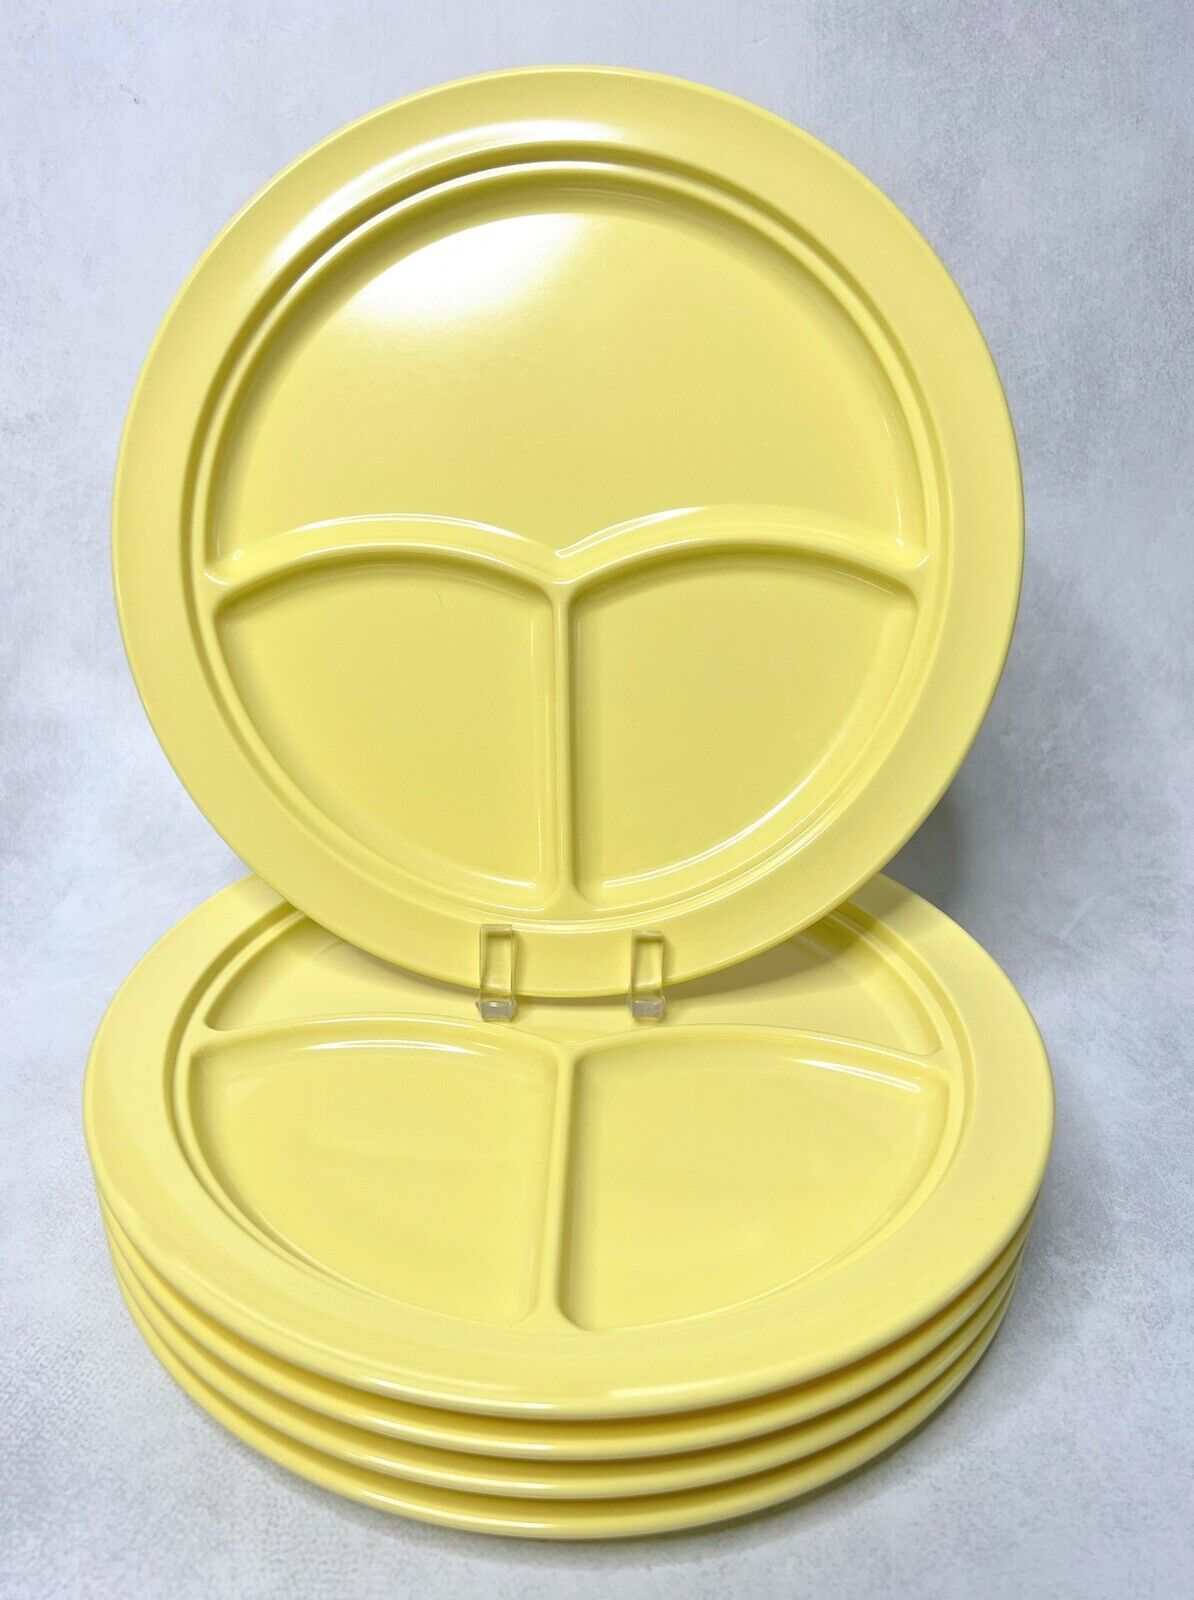 Vintage Melamine BRIGHT YELLOW Super Don-Ite Grill Plates Divided Plates Set/5